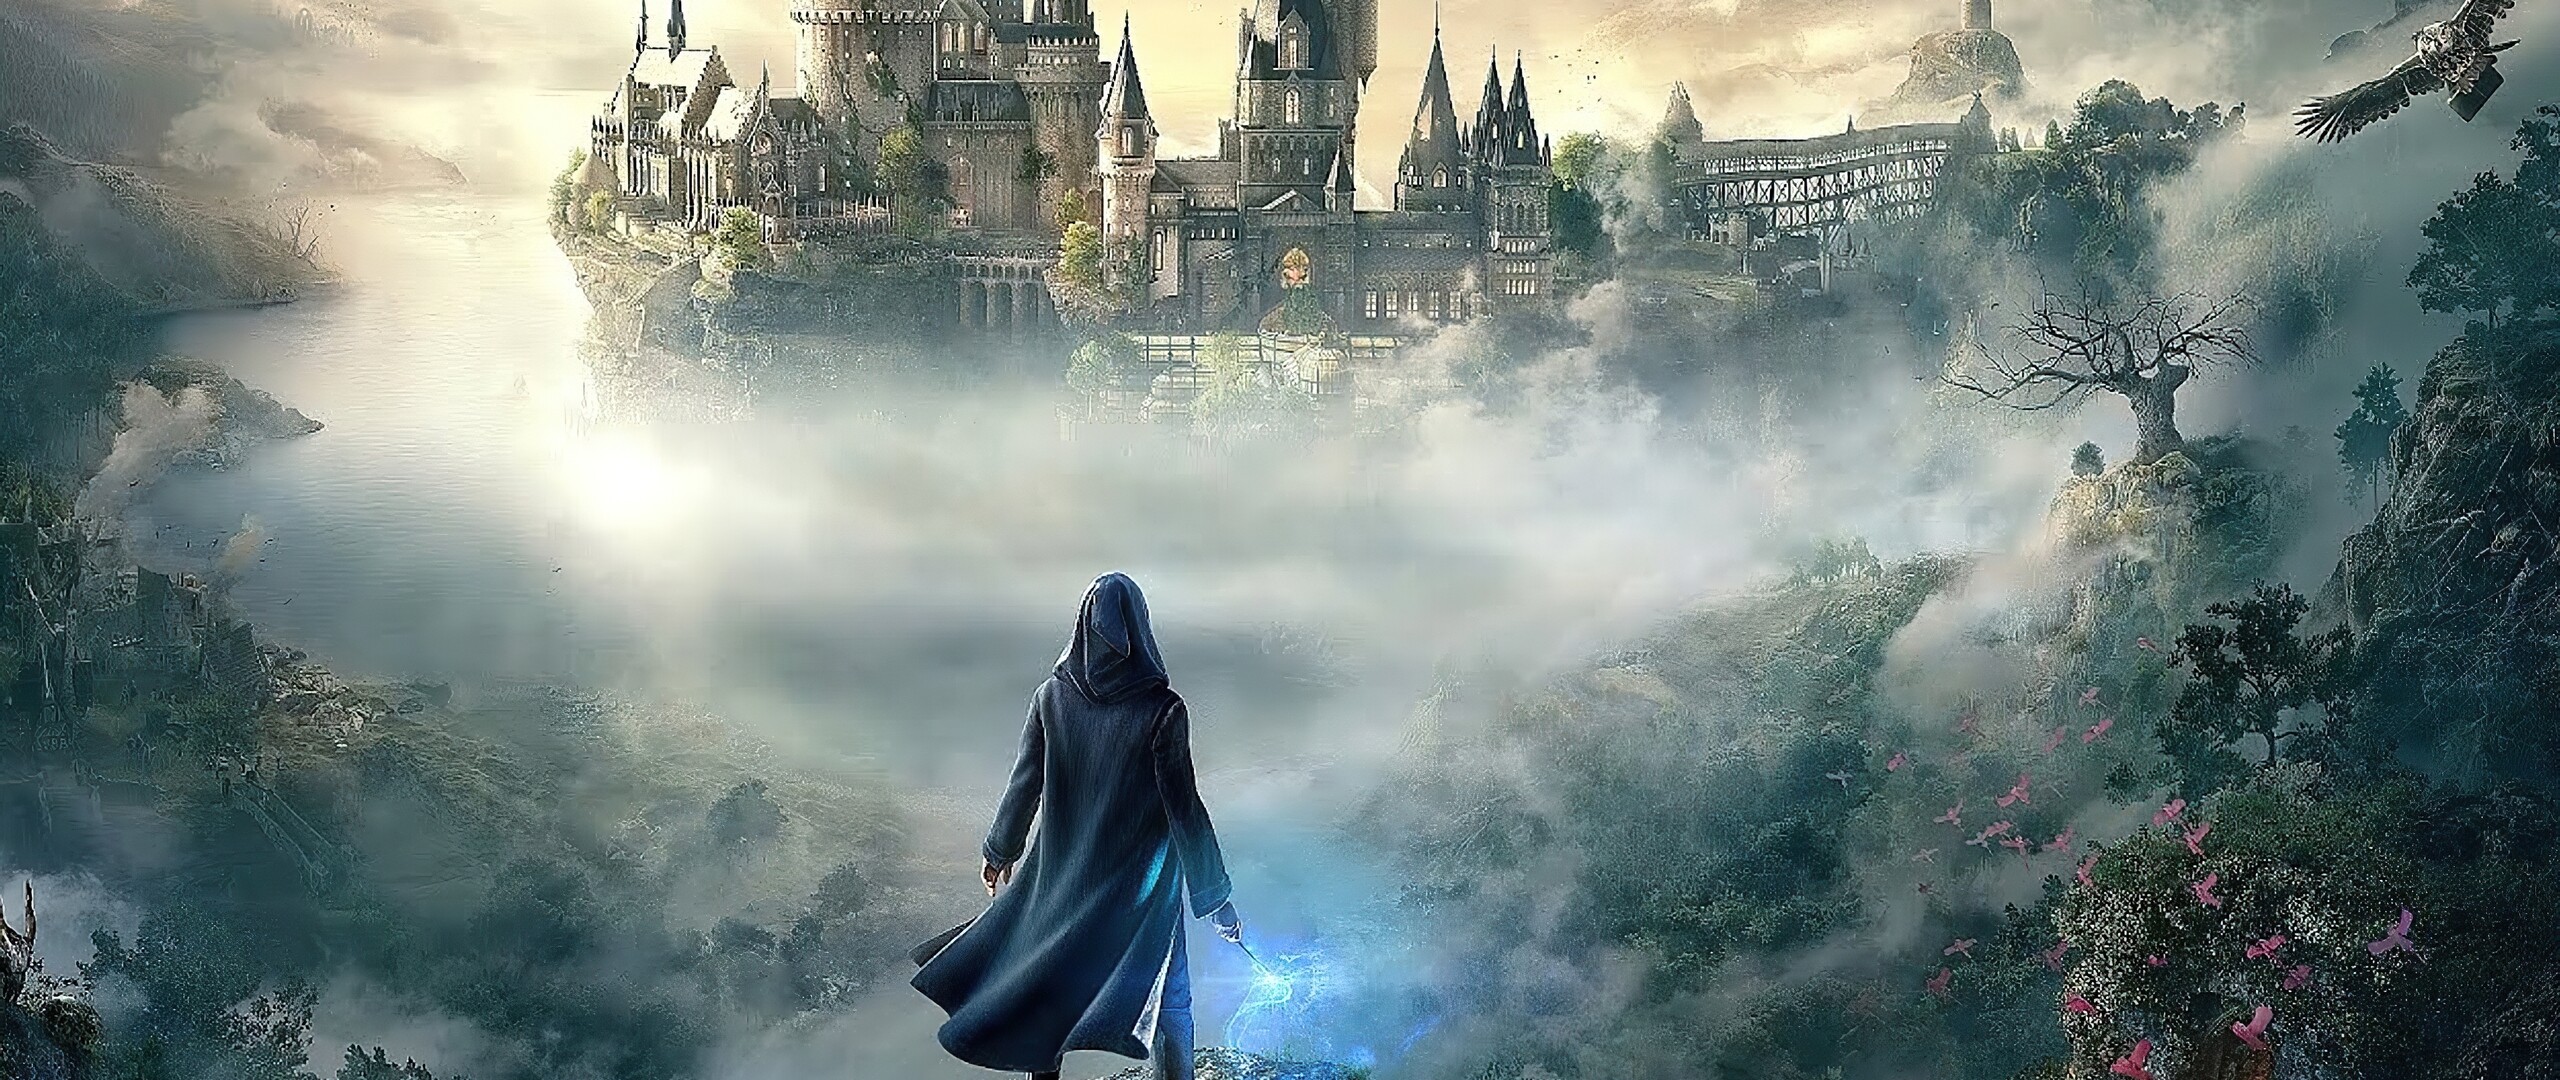 Hogwarts Legacy: Players can explore locations from the Wizarding World franchise. 2560x1080 Dual Screen Background.